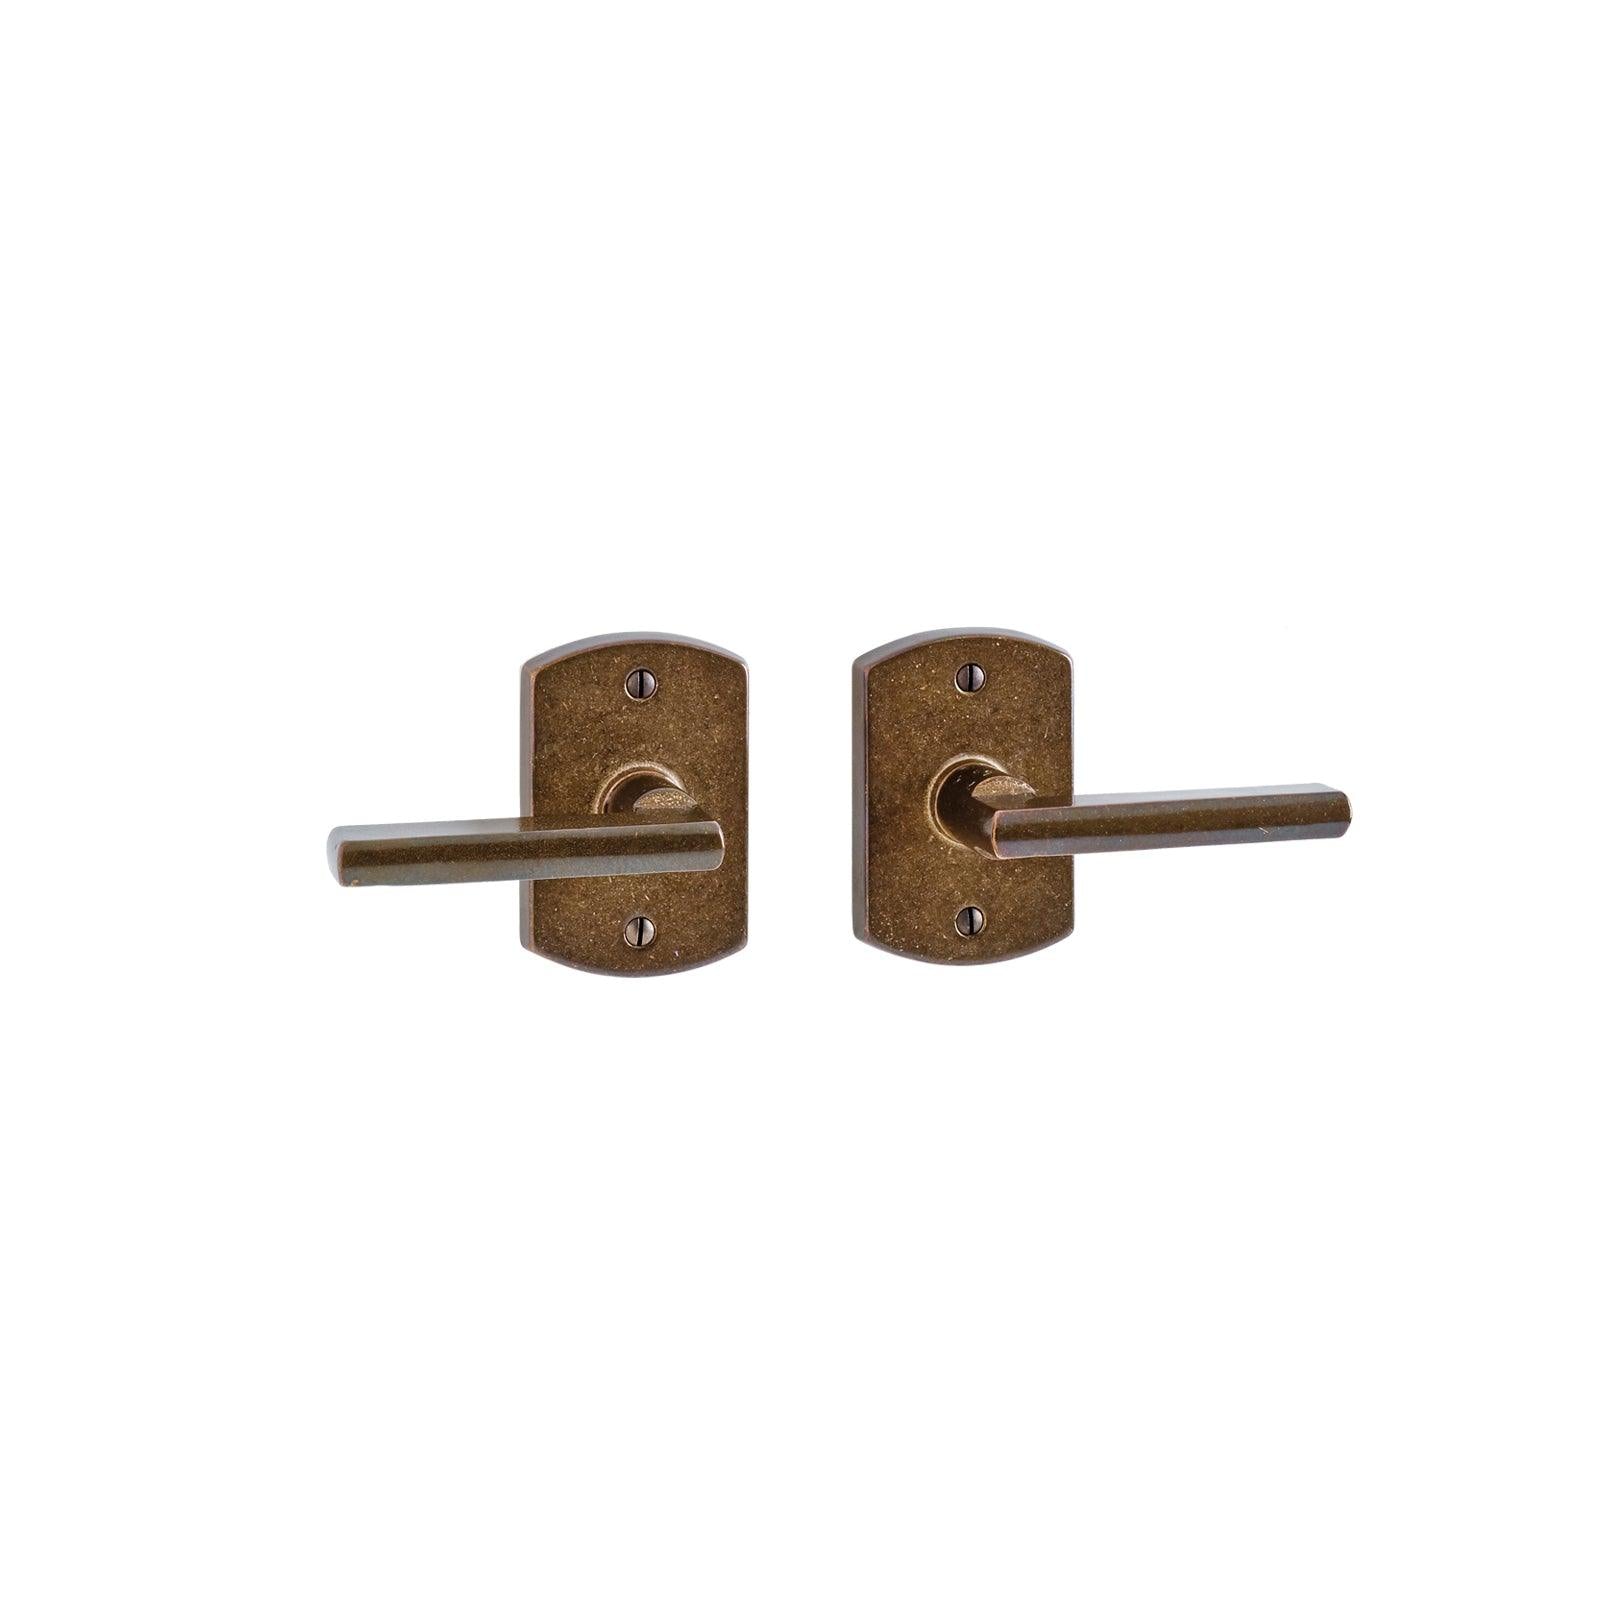 Curved Builder Series 2 1/2" x 6 1/2" EB85 Passage Spring Latch - Discount Rocky Mountain Hardware